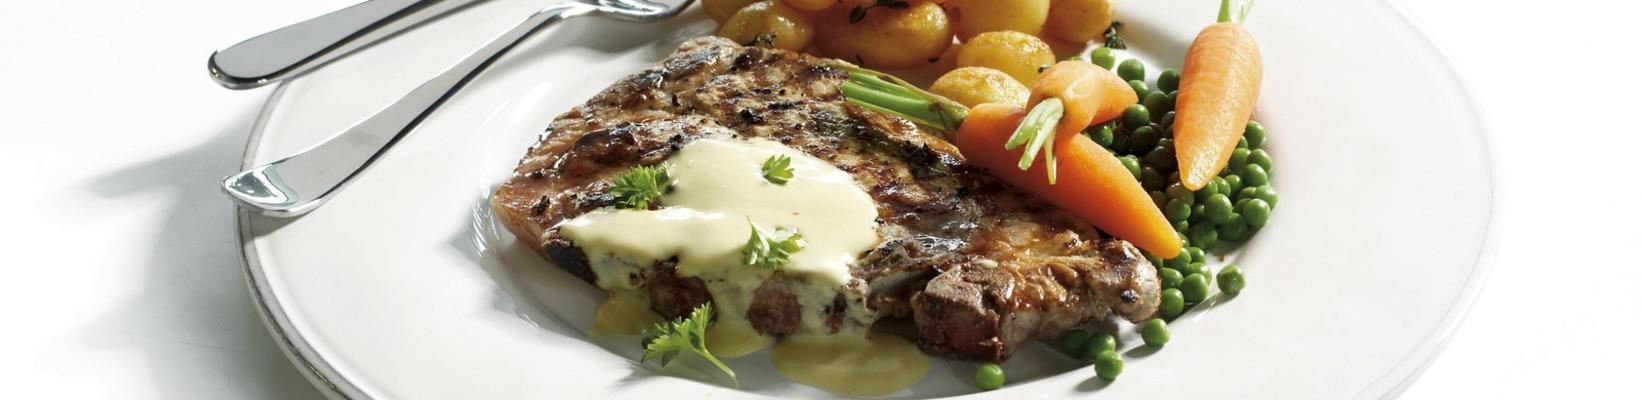 roasted shoulder chops with potatoes and honey-mustard sauce